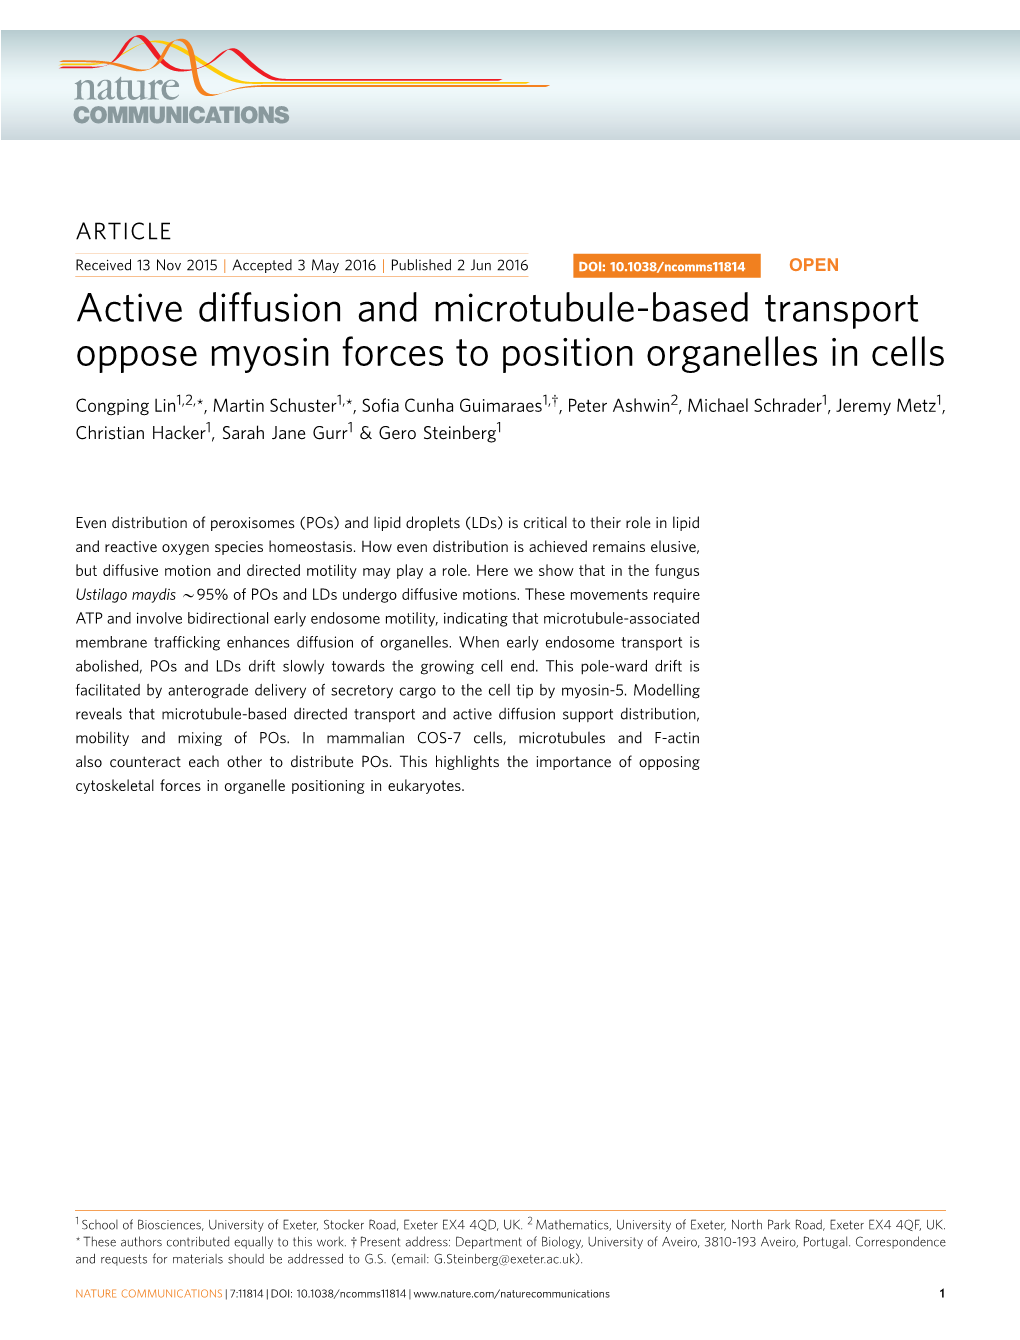 Active Diffusion and Microtubule-Based Transport Oppose Myosin Forces to Position Organelles in Cells